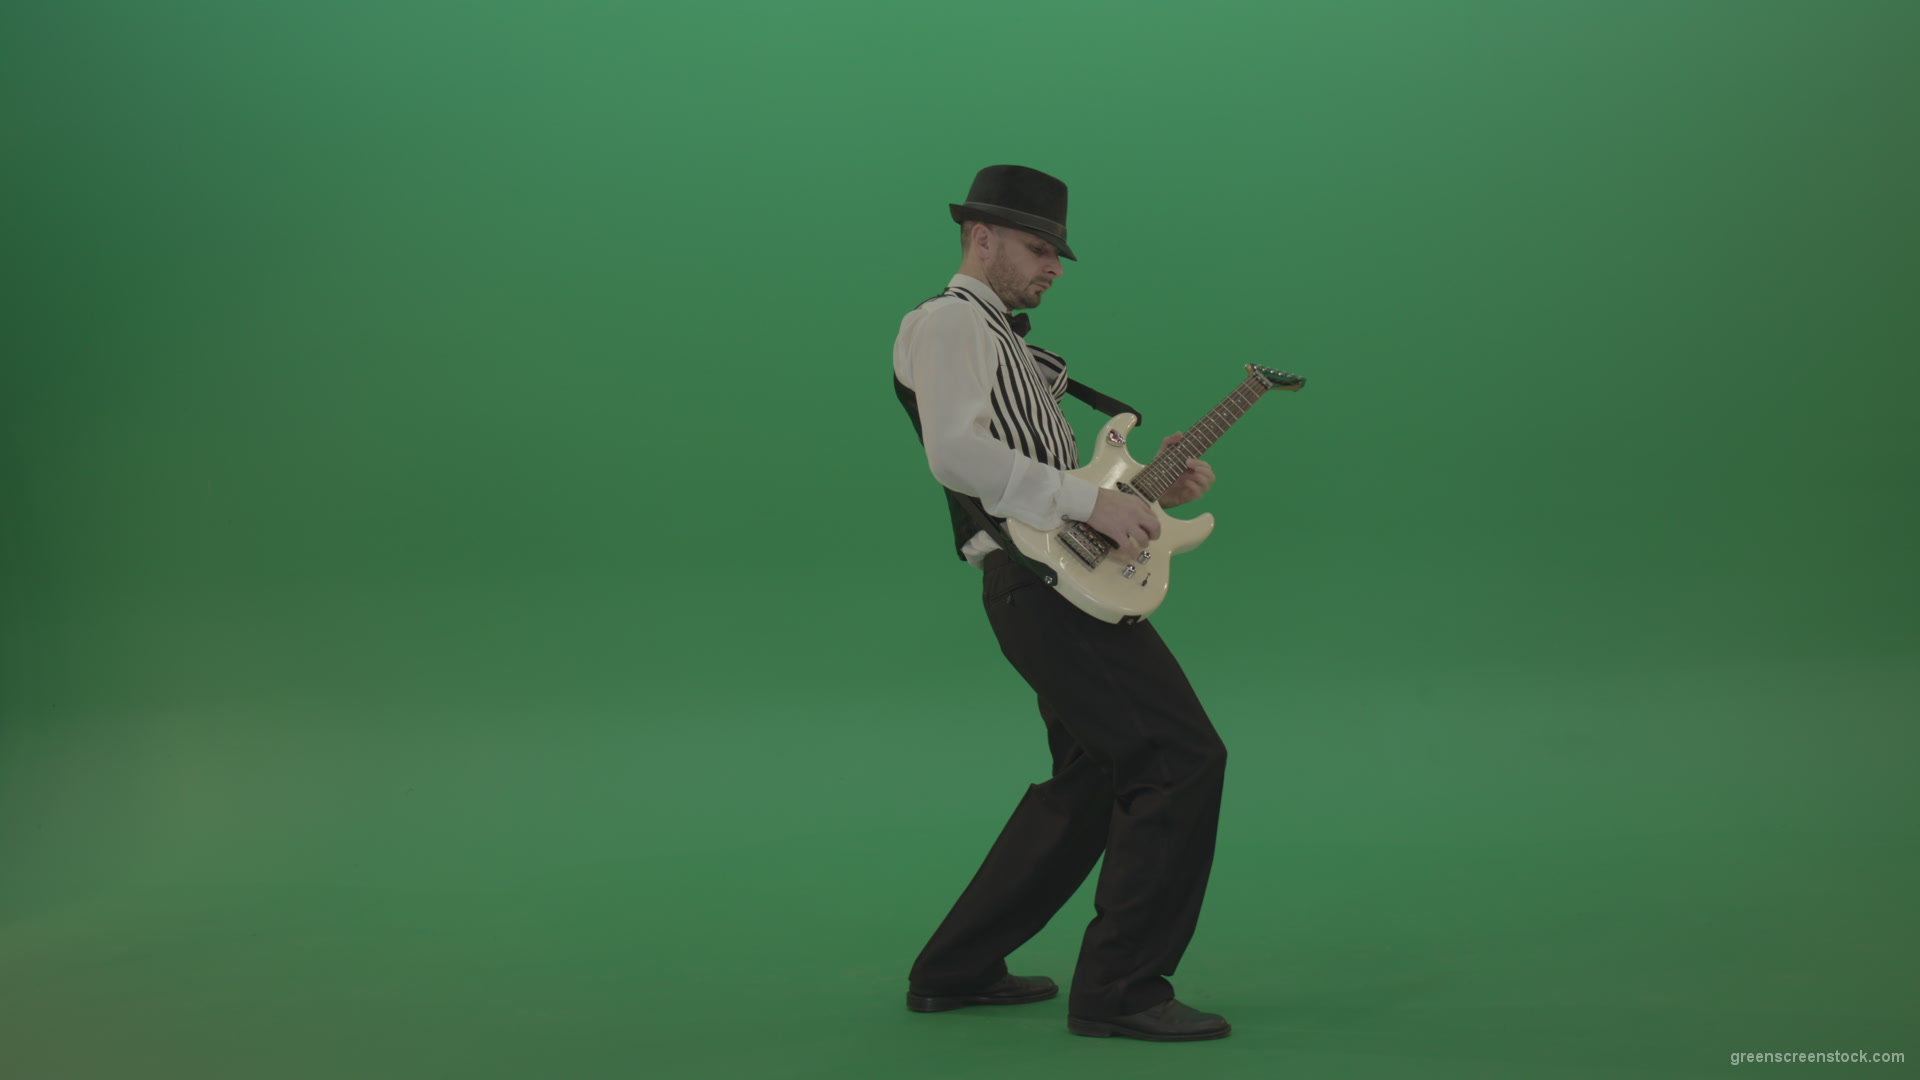 Jazz-man-musician-play-guitar-solo-music-in-guitar-on-green-screen-isolated-in-side-view_004 Green Screen Stock